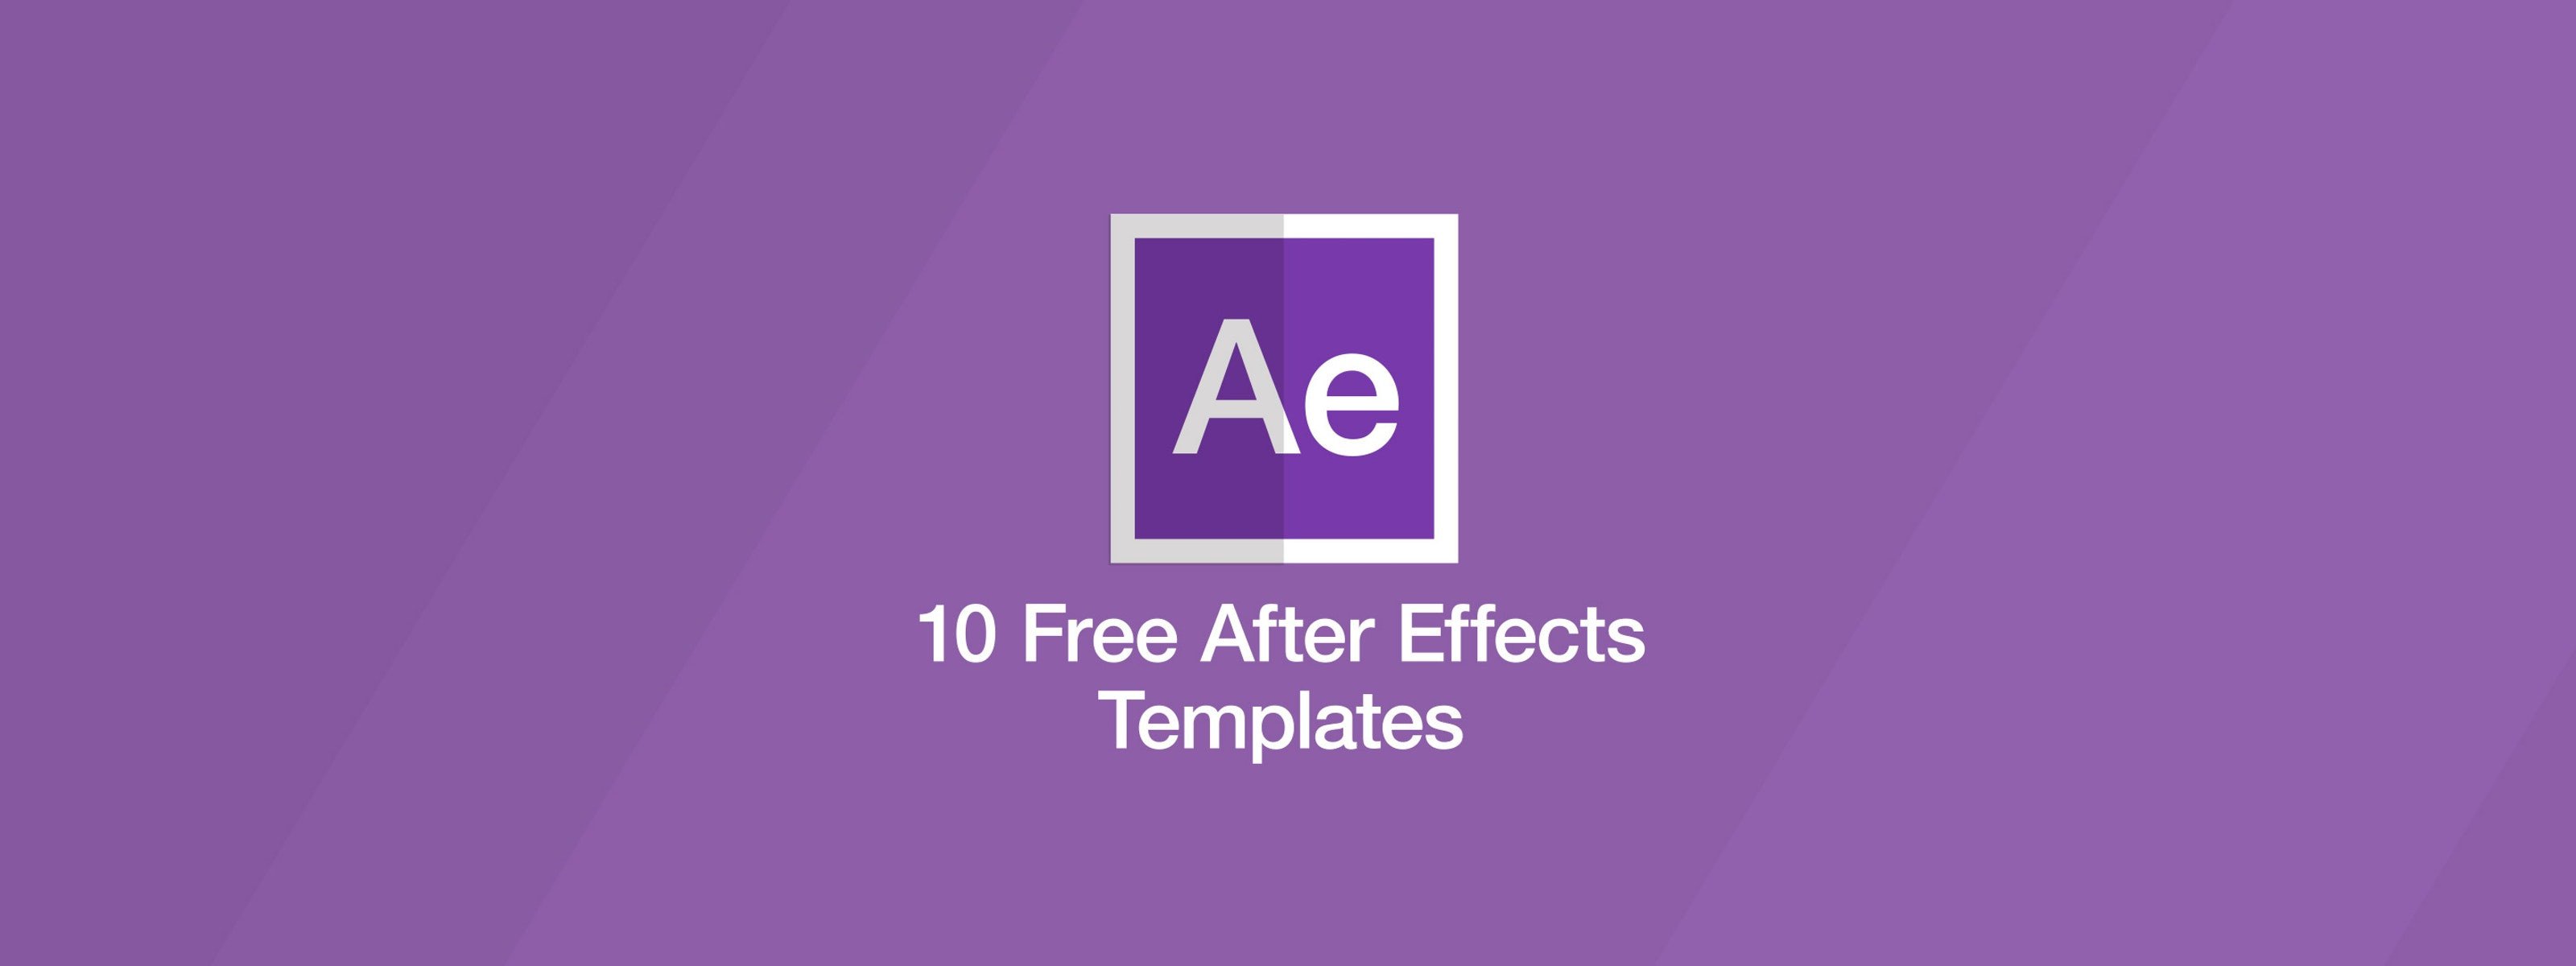 After Effects Templates Free 10 Free after Effects Templates